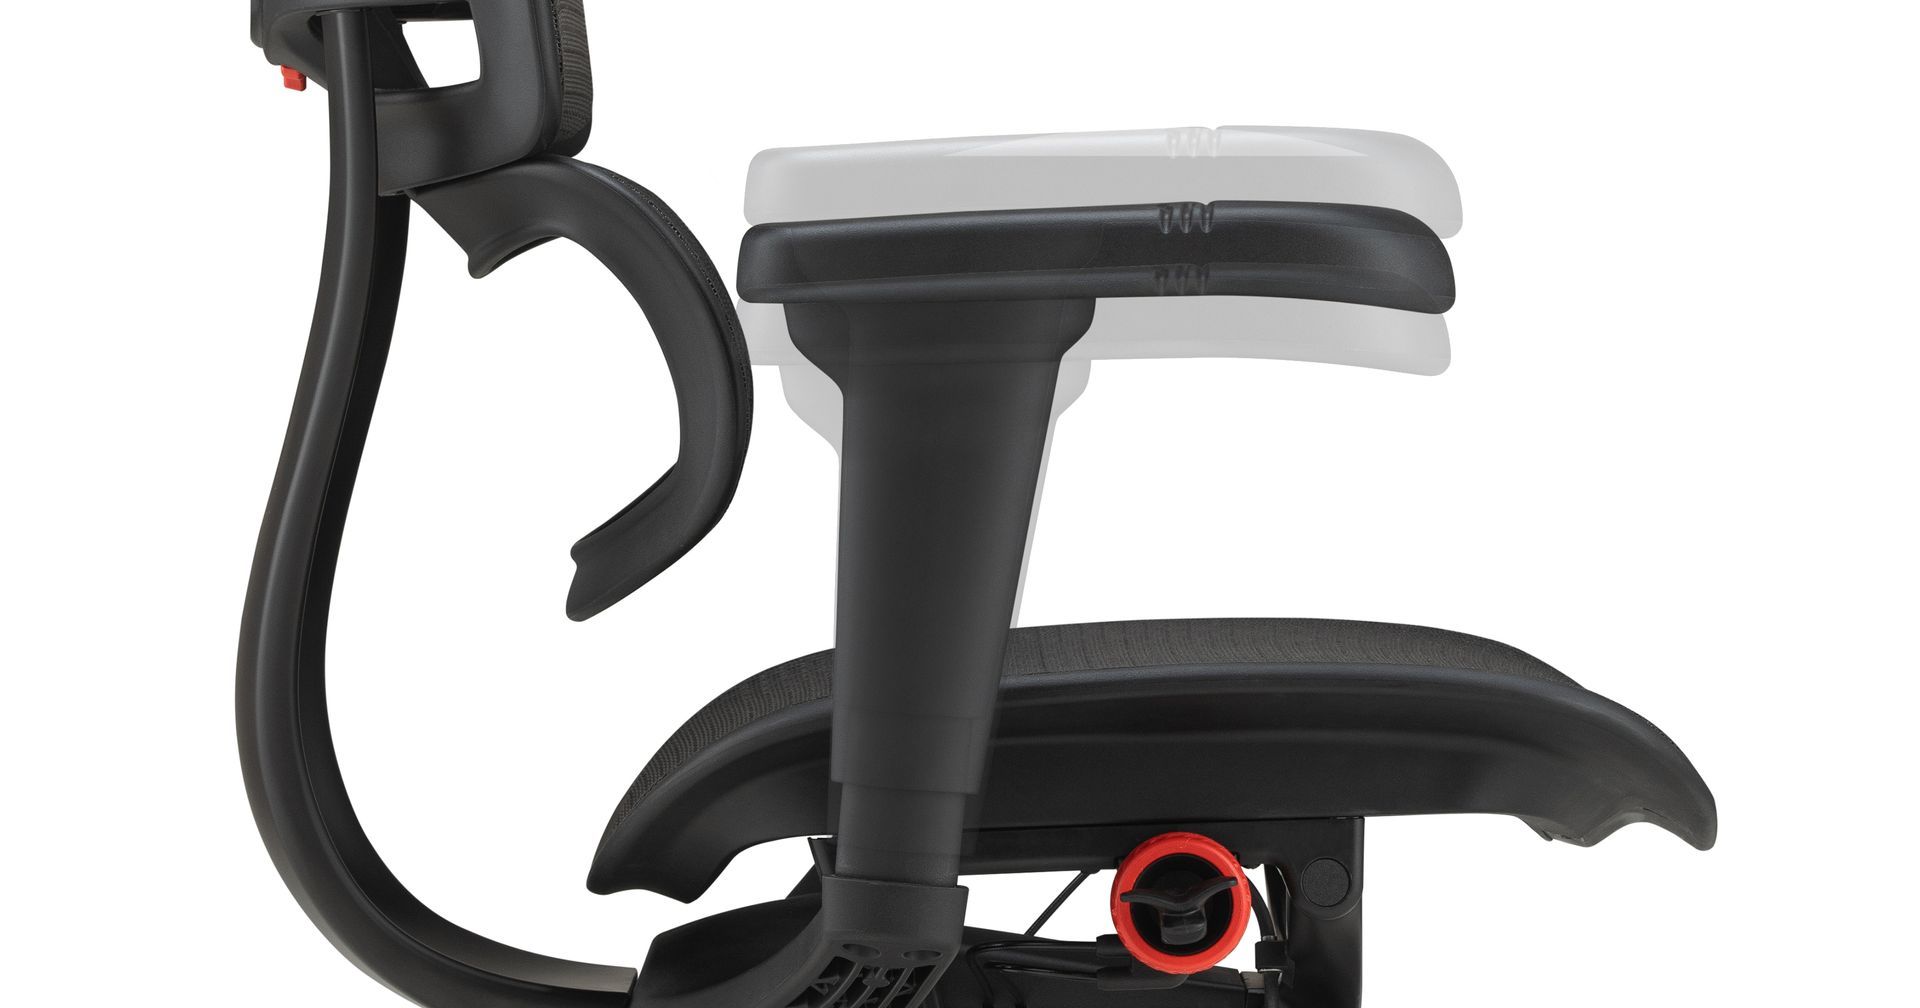 Profile view of the Ergohuman Ultra gaming chair armrest, showcasing height adjustment